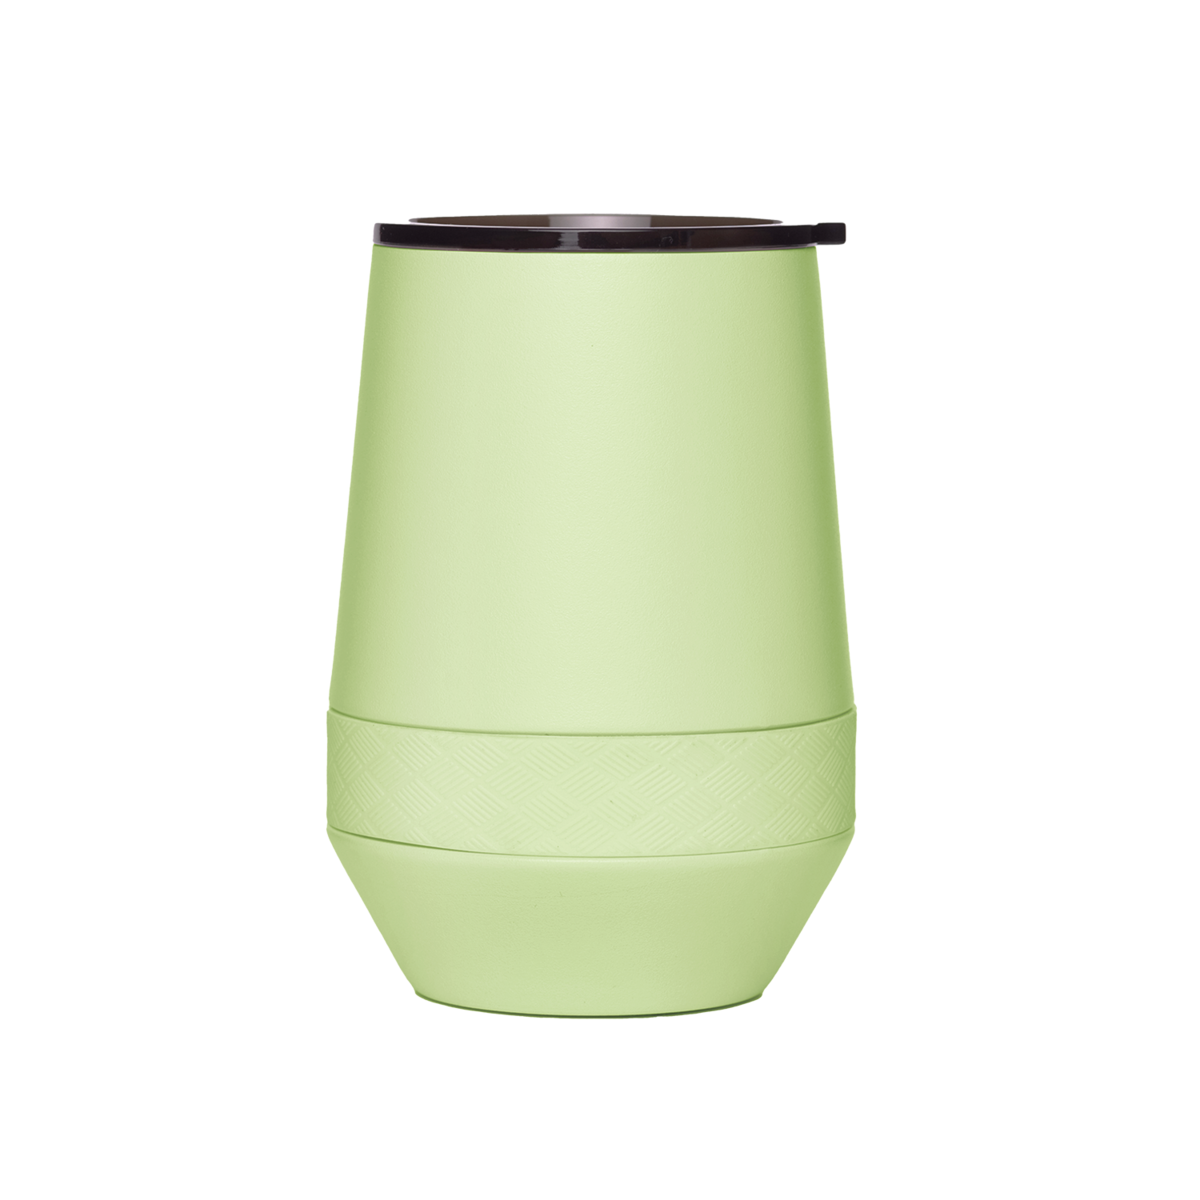 Customizable Elemental® 10 oz Stainless Steel Stemless Tumbler in key lime.